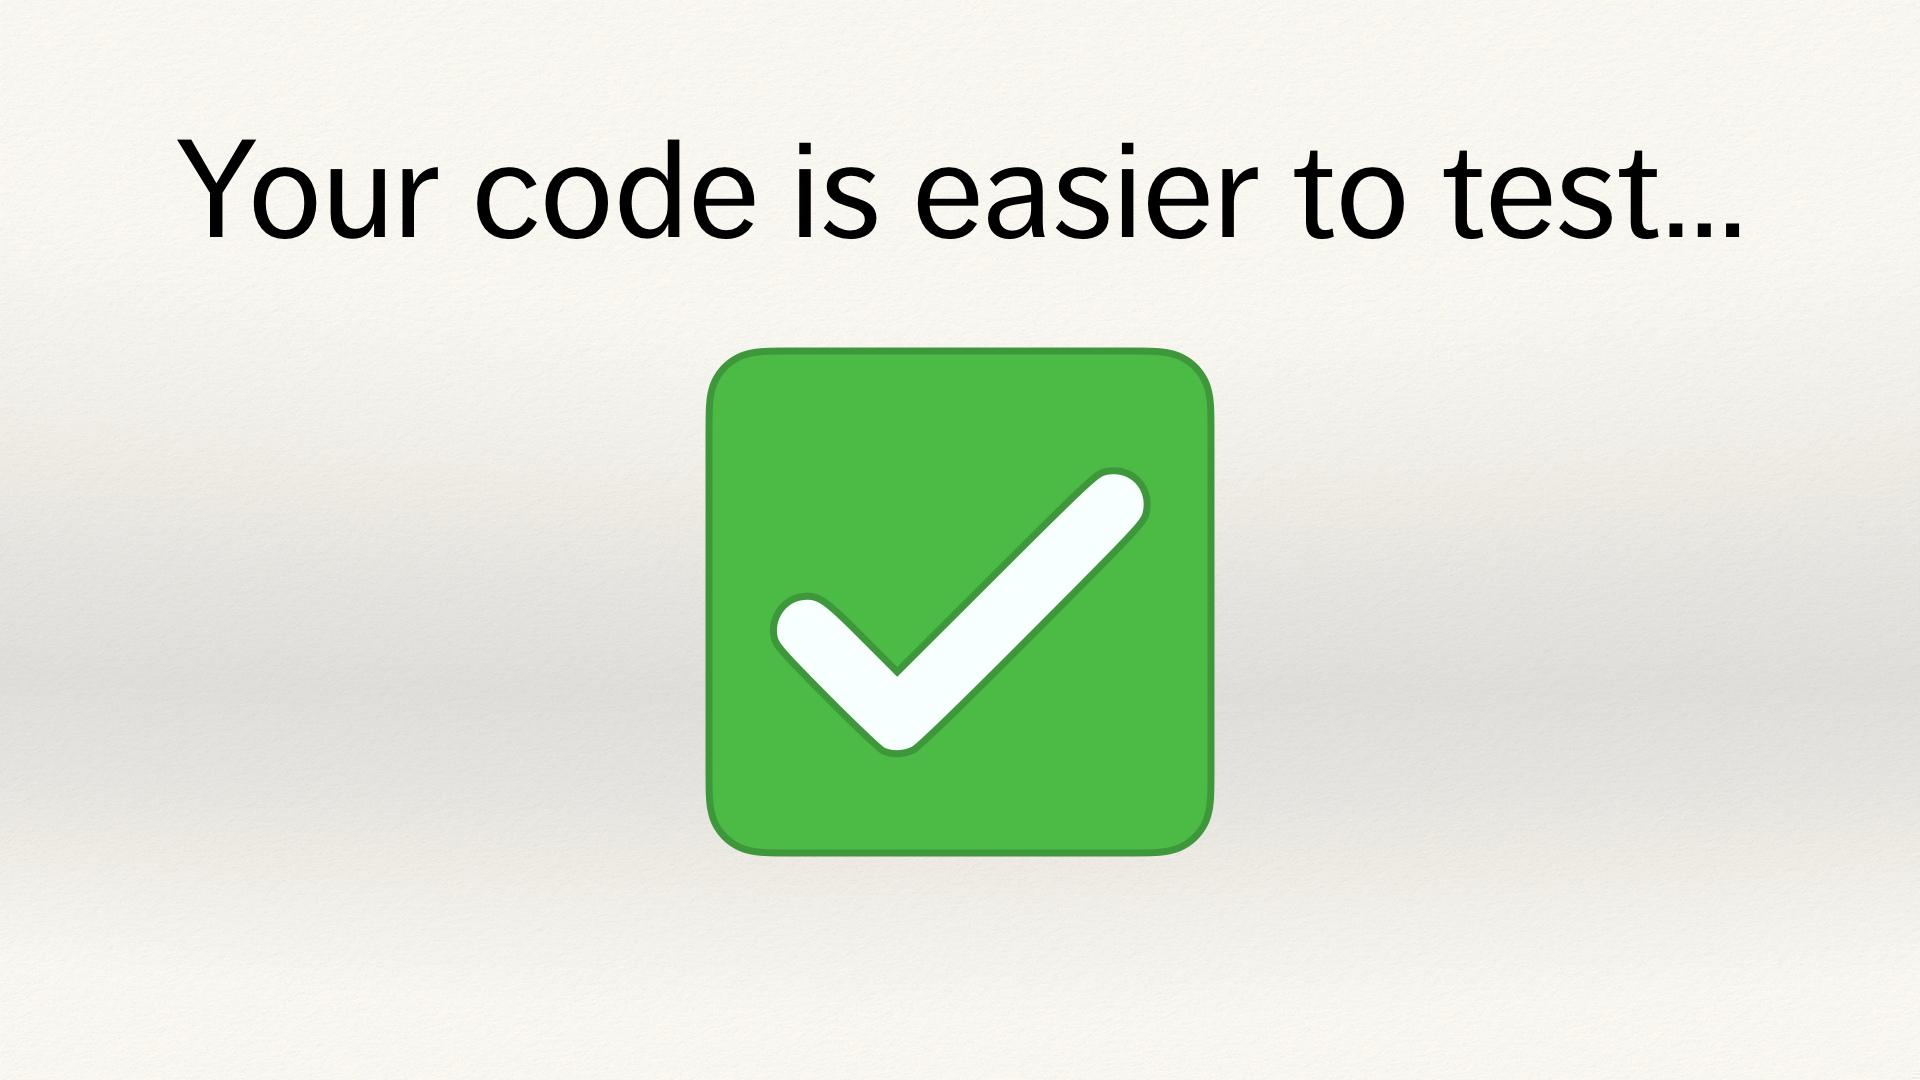 Green tick mark, below the text “Your code is easier to test”.